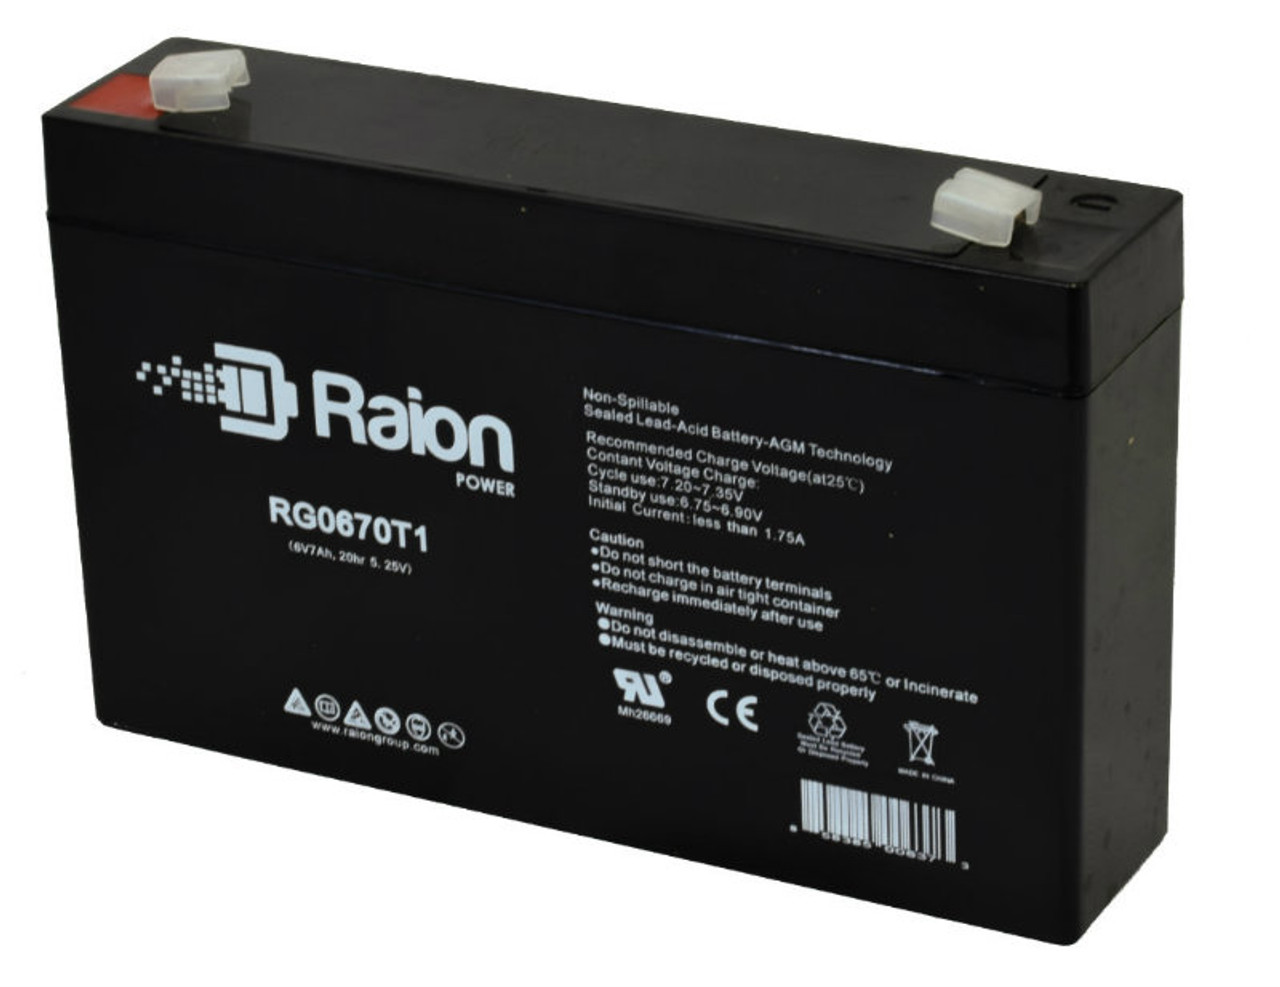 Raion Power RG0670T1 6V 7Ah Replacement Emergency Lighting Battery for Lithonia ES